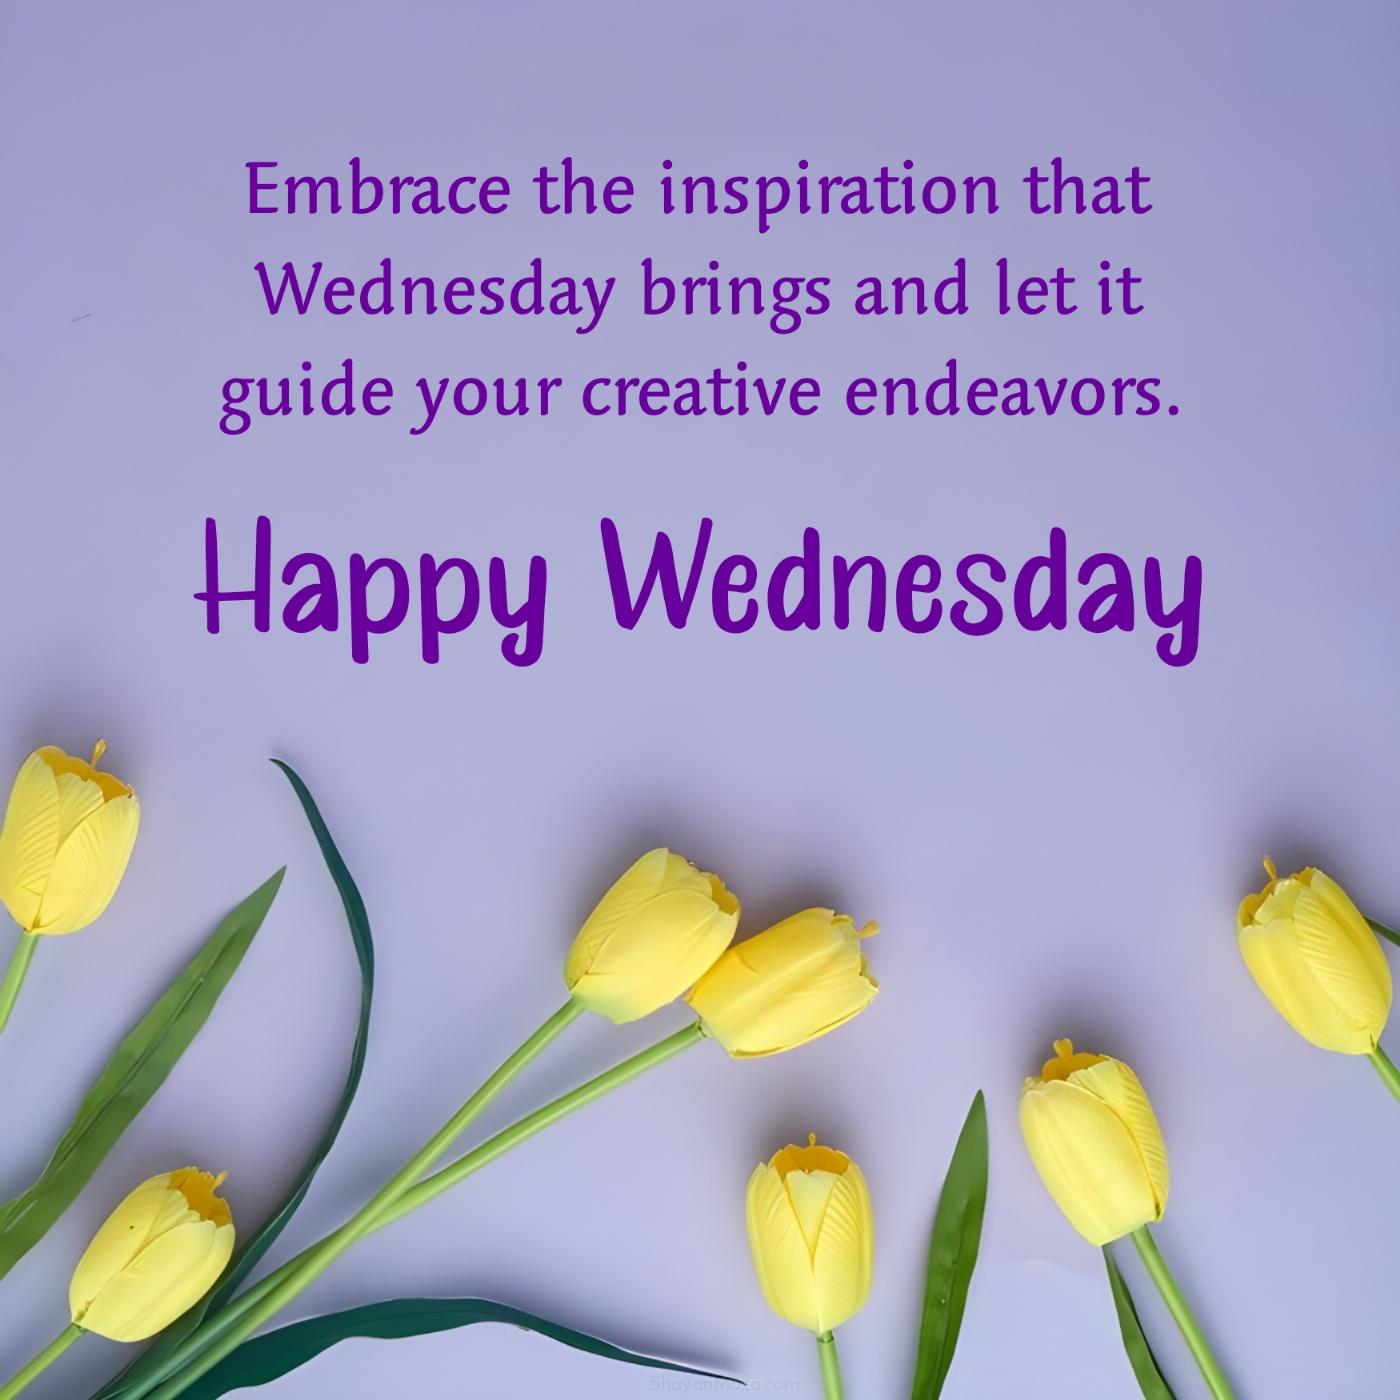 Embrace the inspiration that Wednesday brings and let it guide your creative endeavors